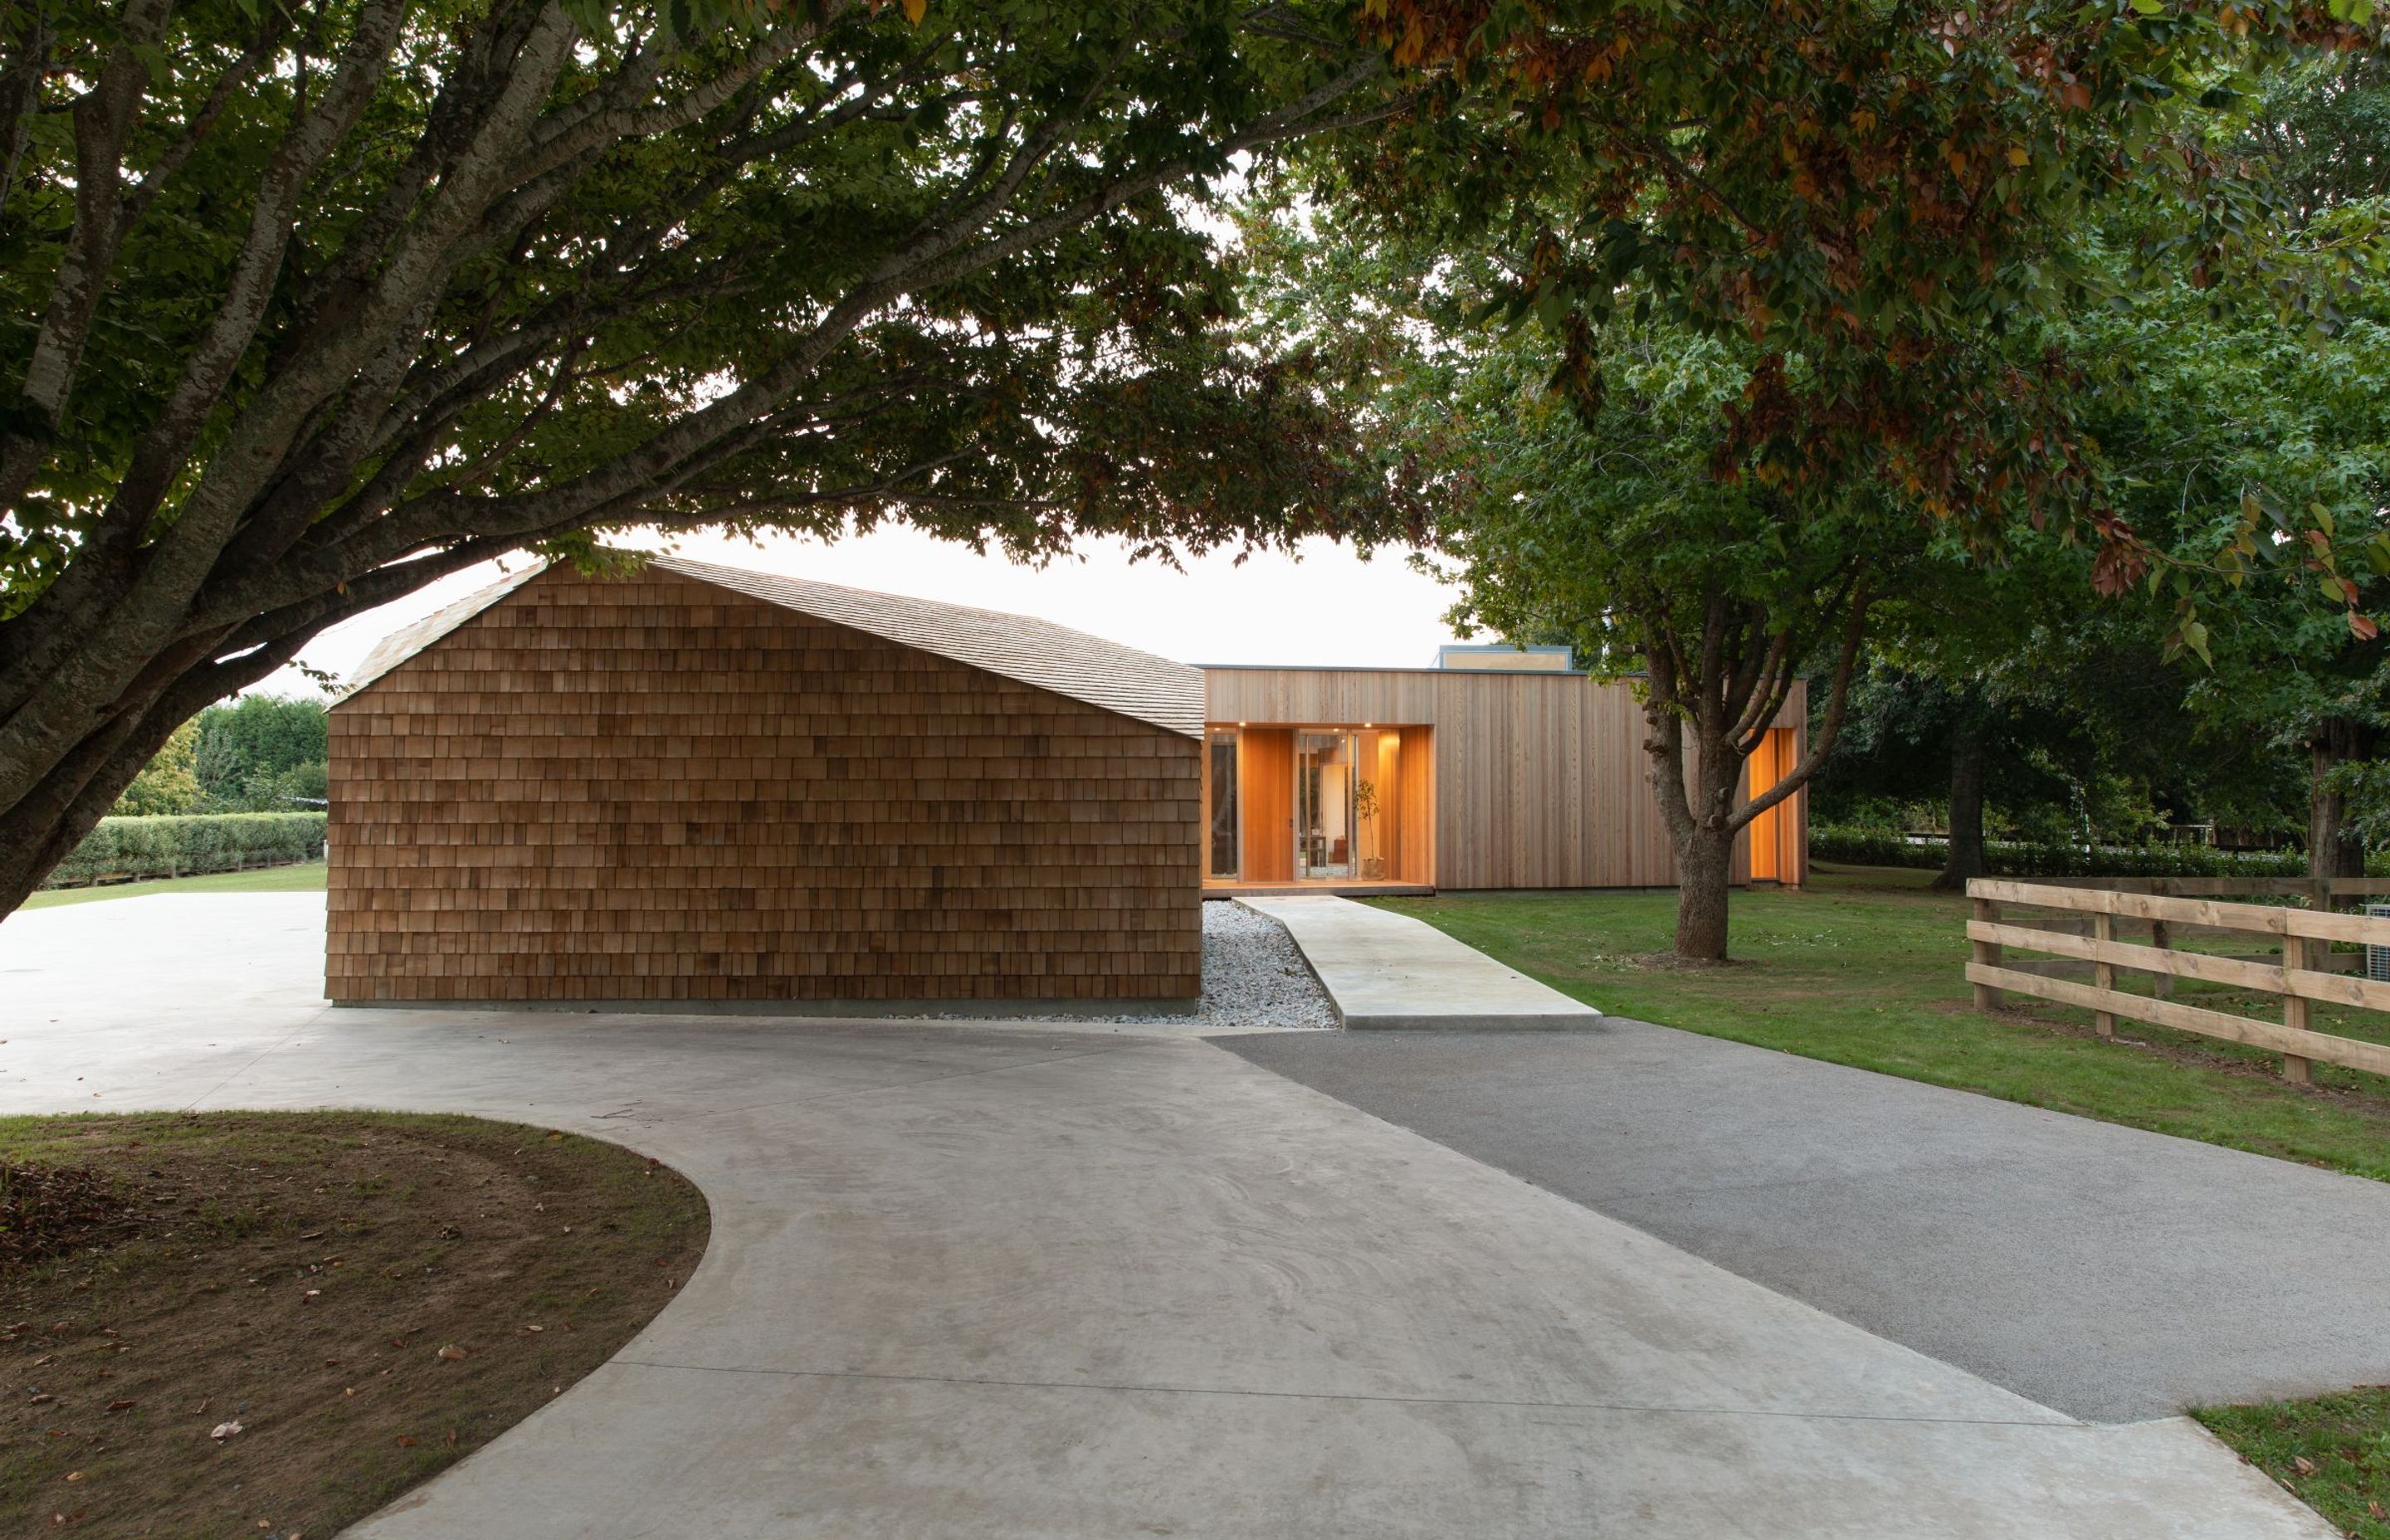 Plum, cherry, cedar and a golden elm tree line the driveway up to Shibui House, which is made up of three interconnected boxes cloaked in cedar.